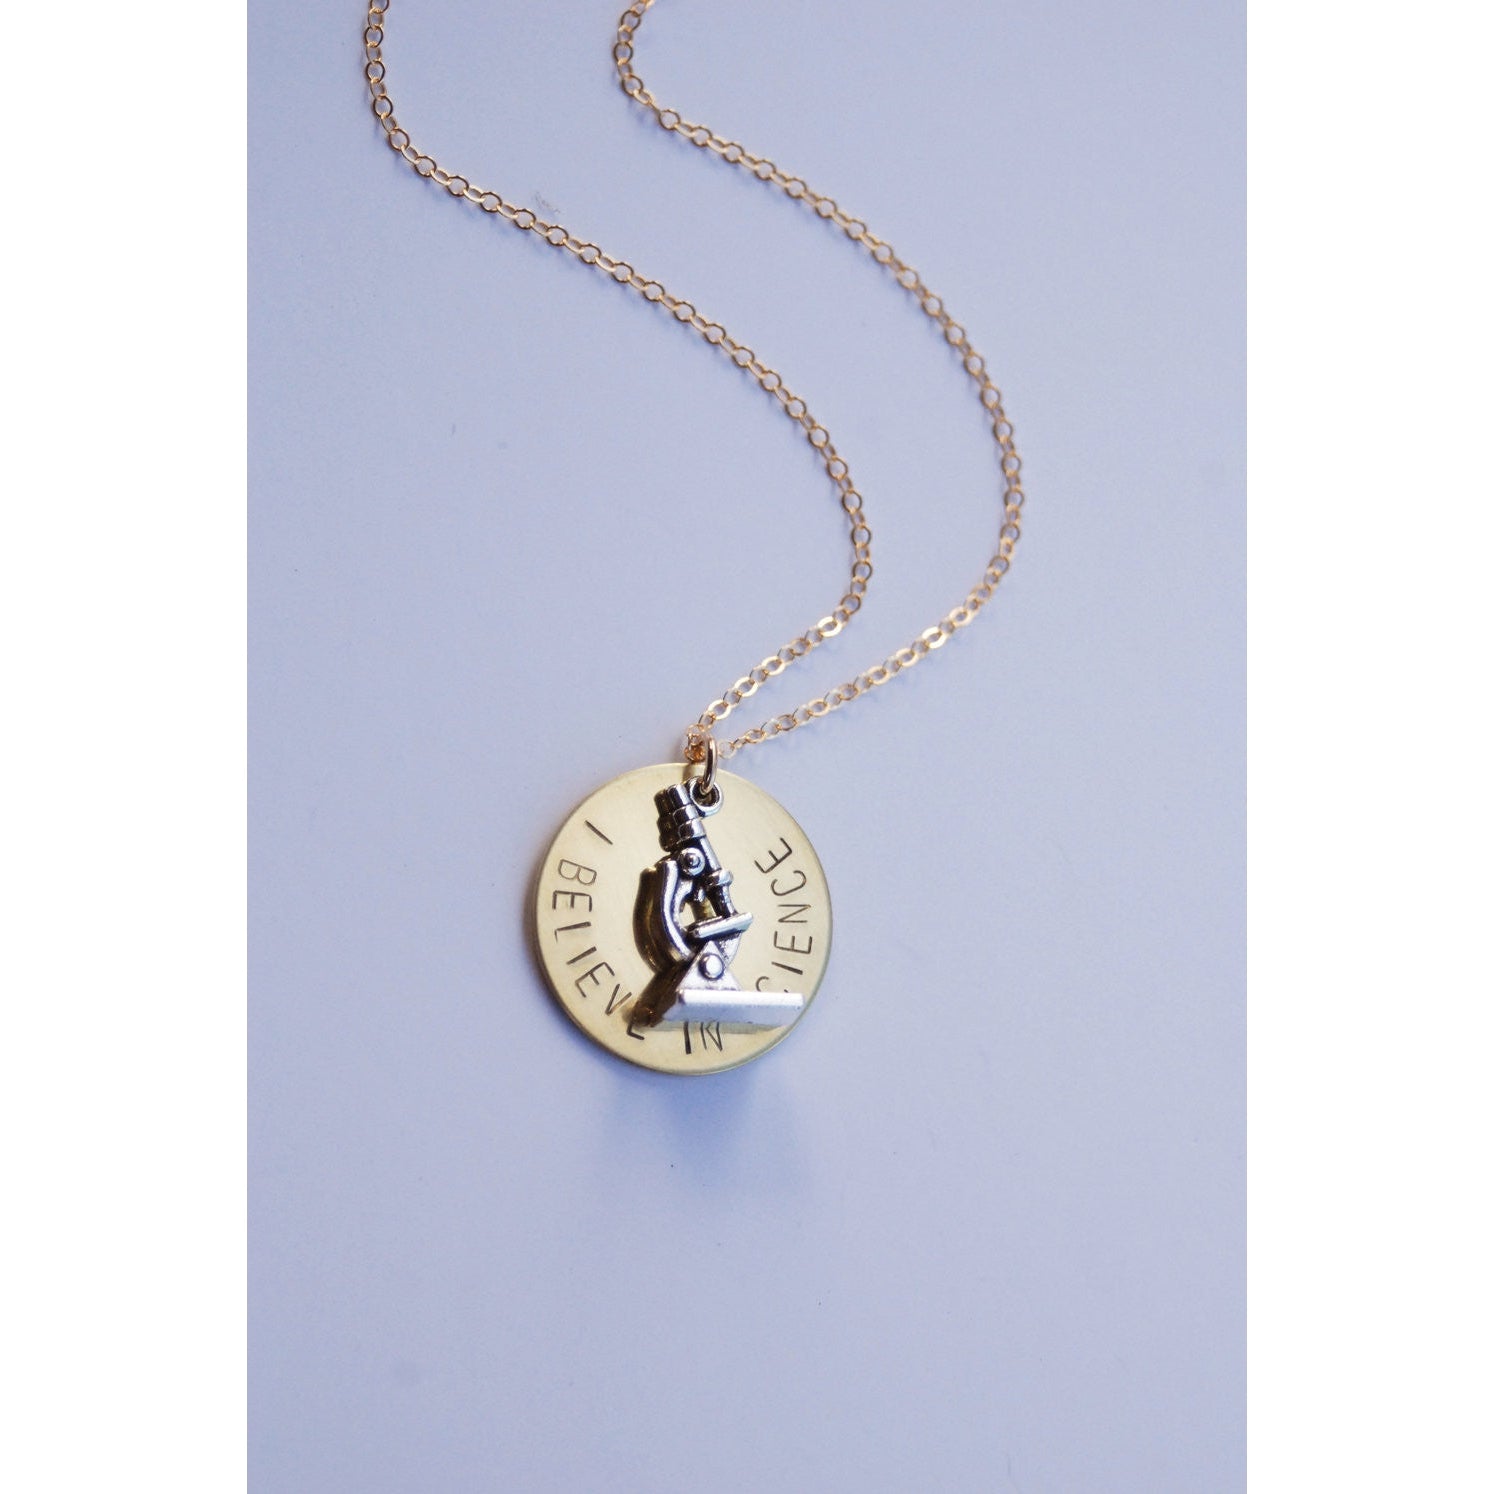 I Believe in Science Microscope Necklace | Hand-Stamped | Gold-Filled Chain